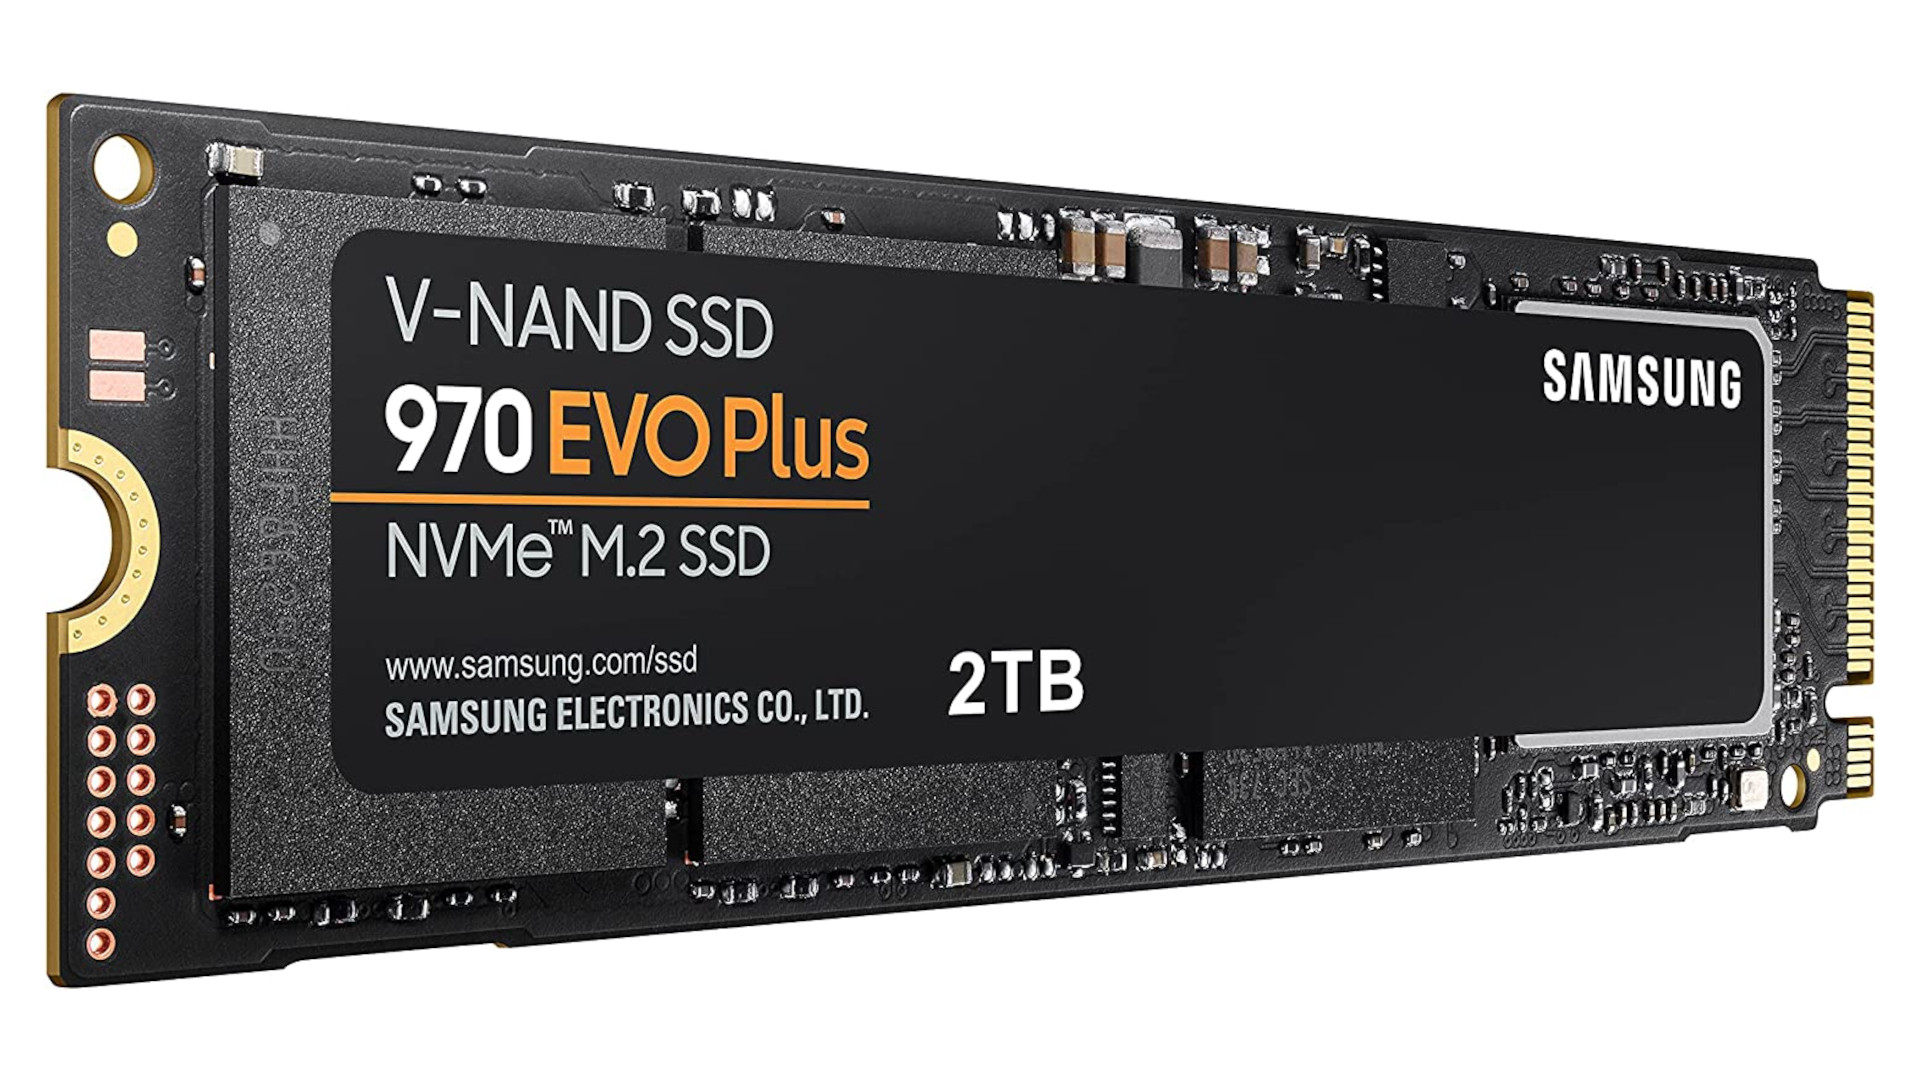 Get 54% off this Samsung NVMe SSD to store all your Steam Winter Sale PC games